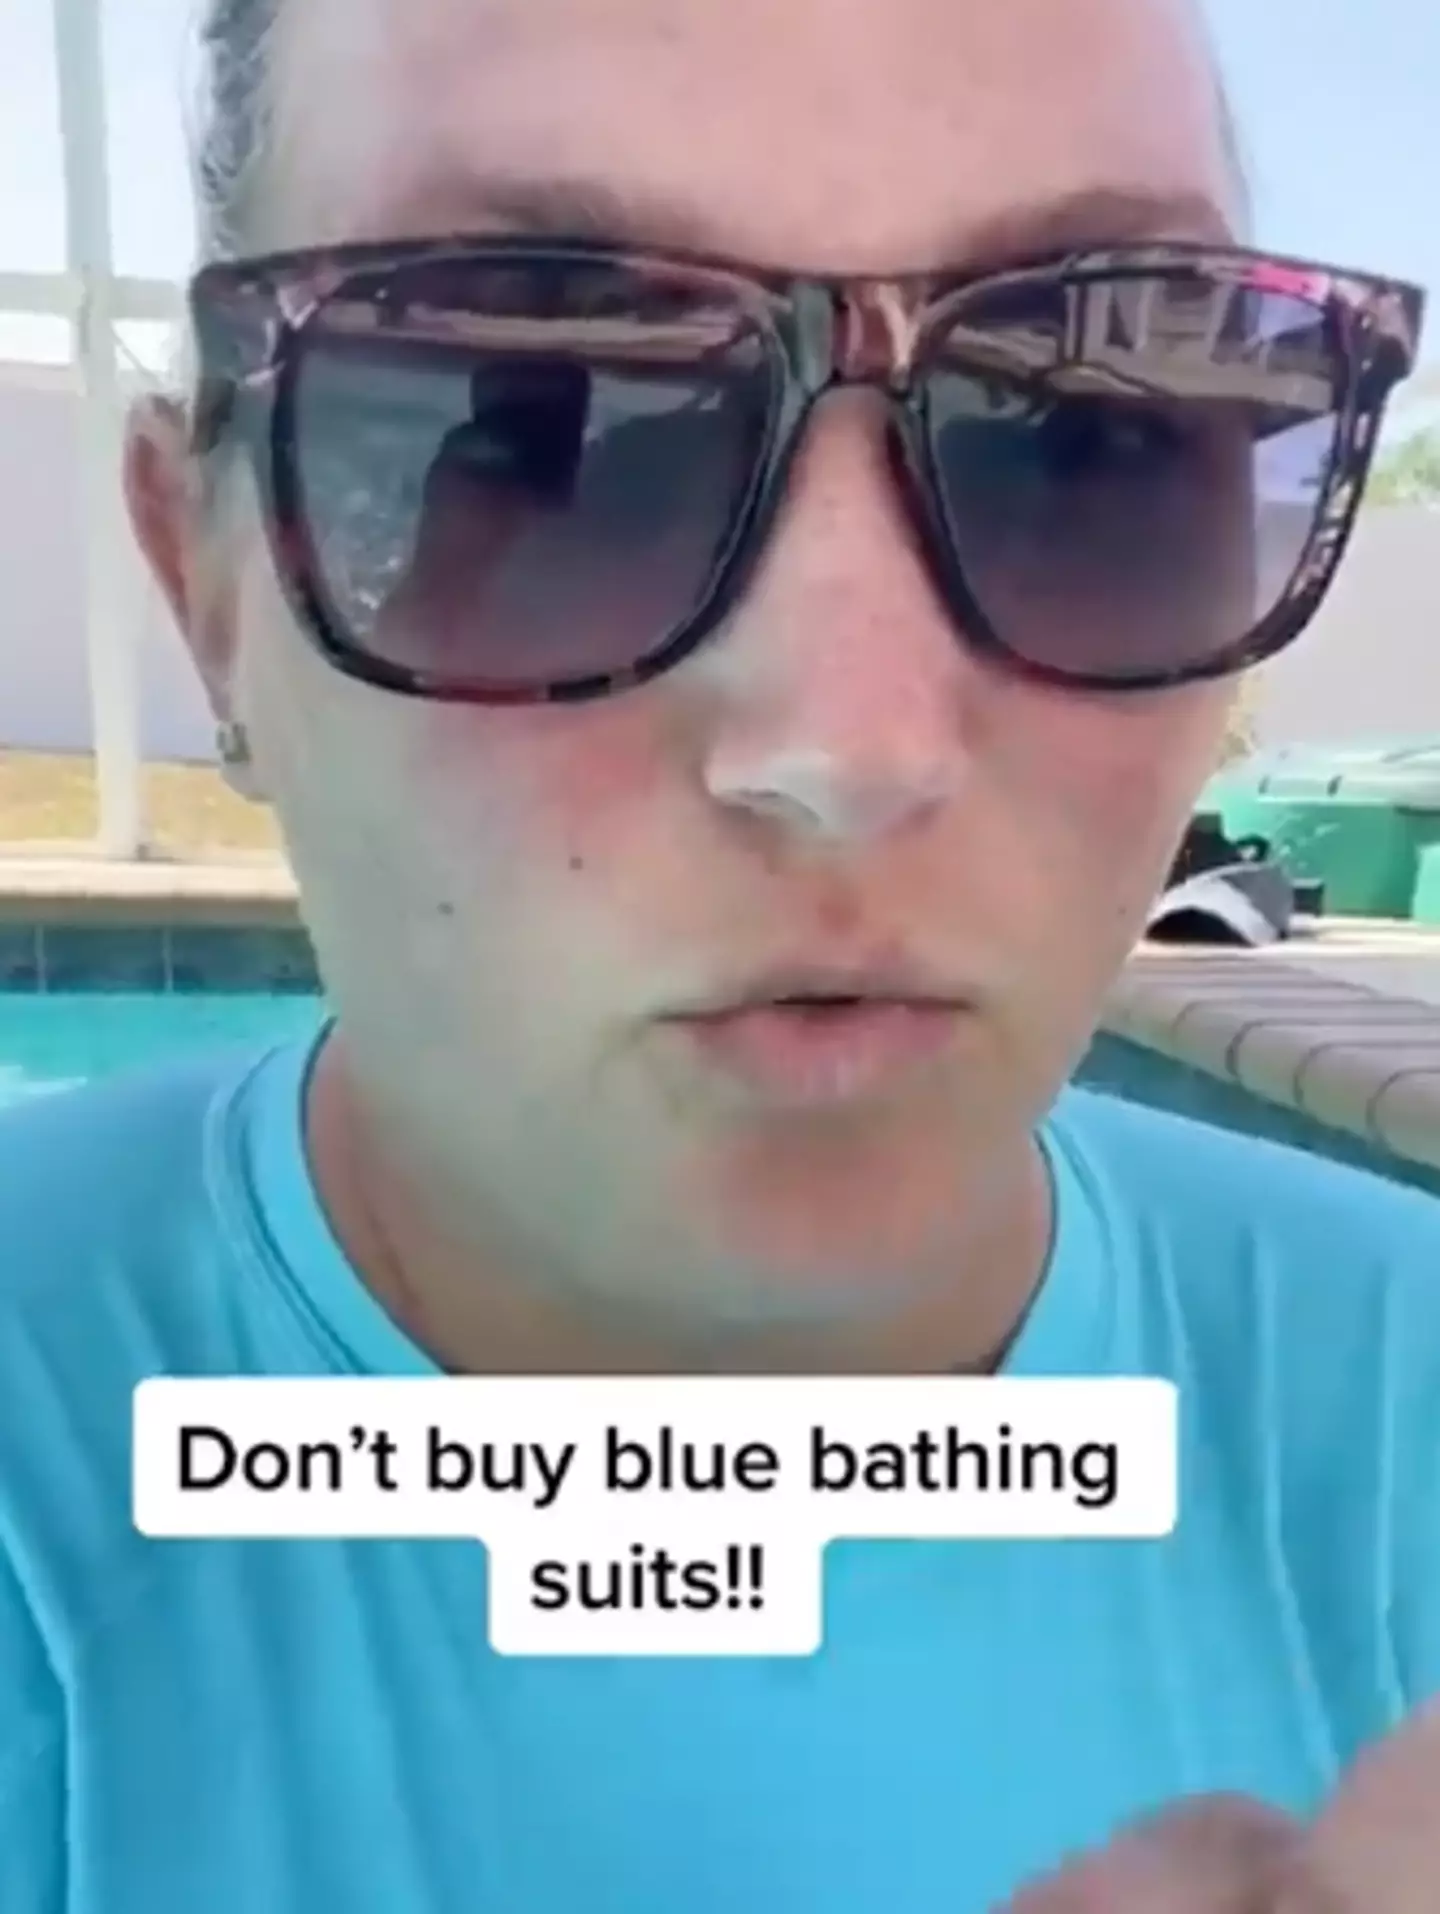 The mum warns other parents not to buy blue swimsuits.